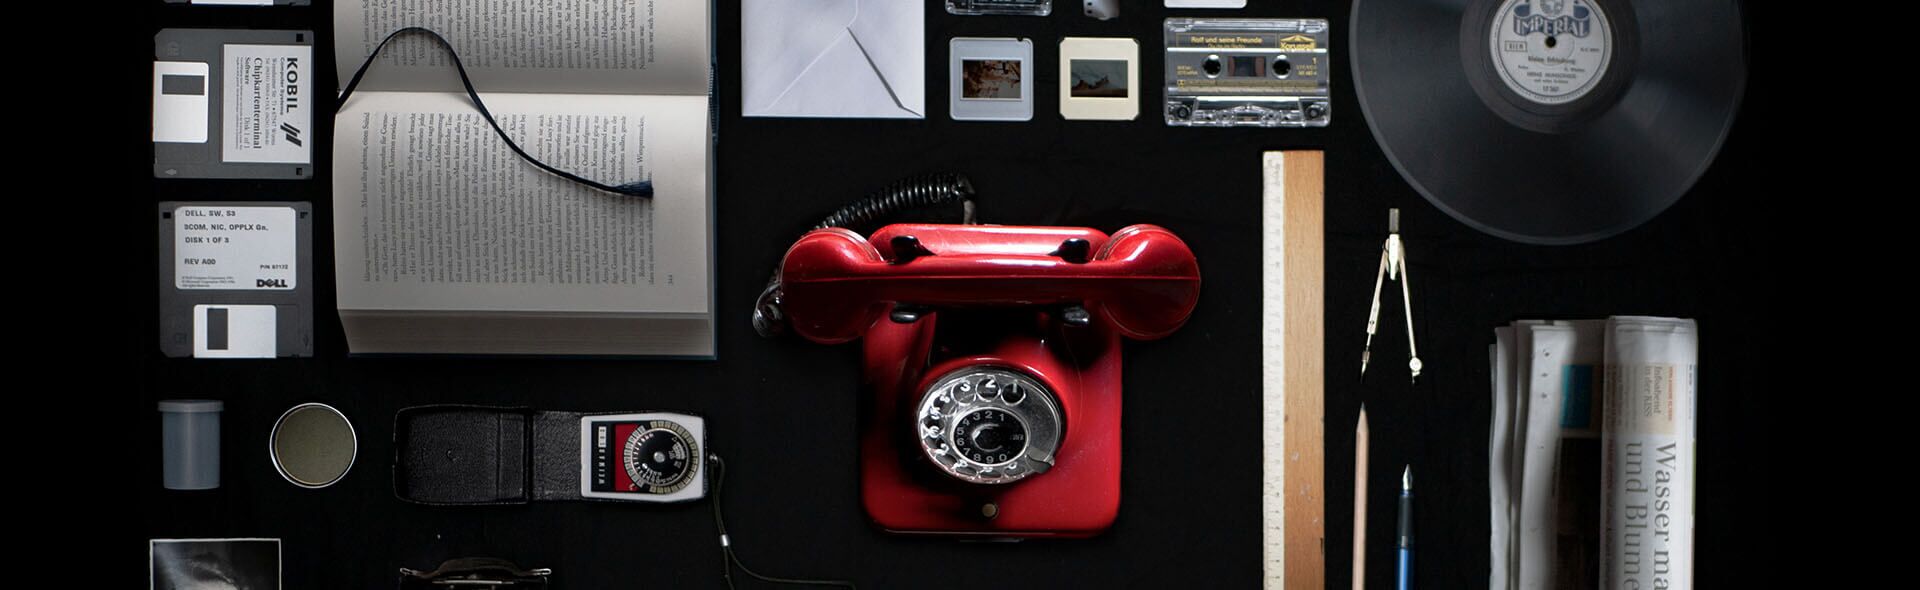 Red telephone, vinyl, video tapes and other retro stuff